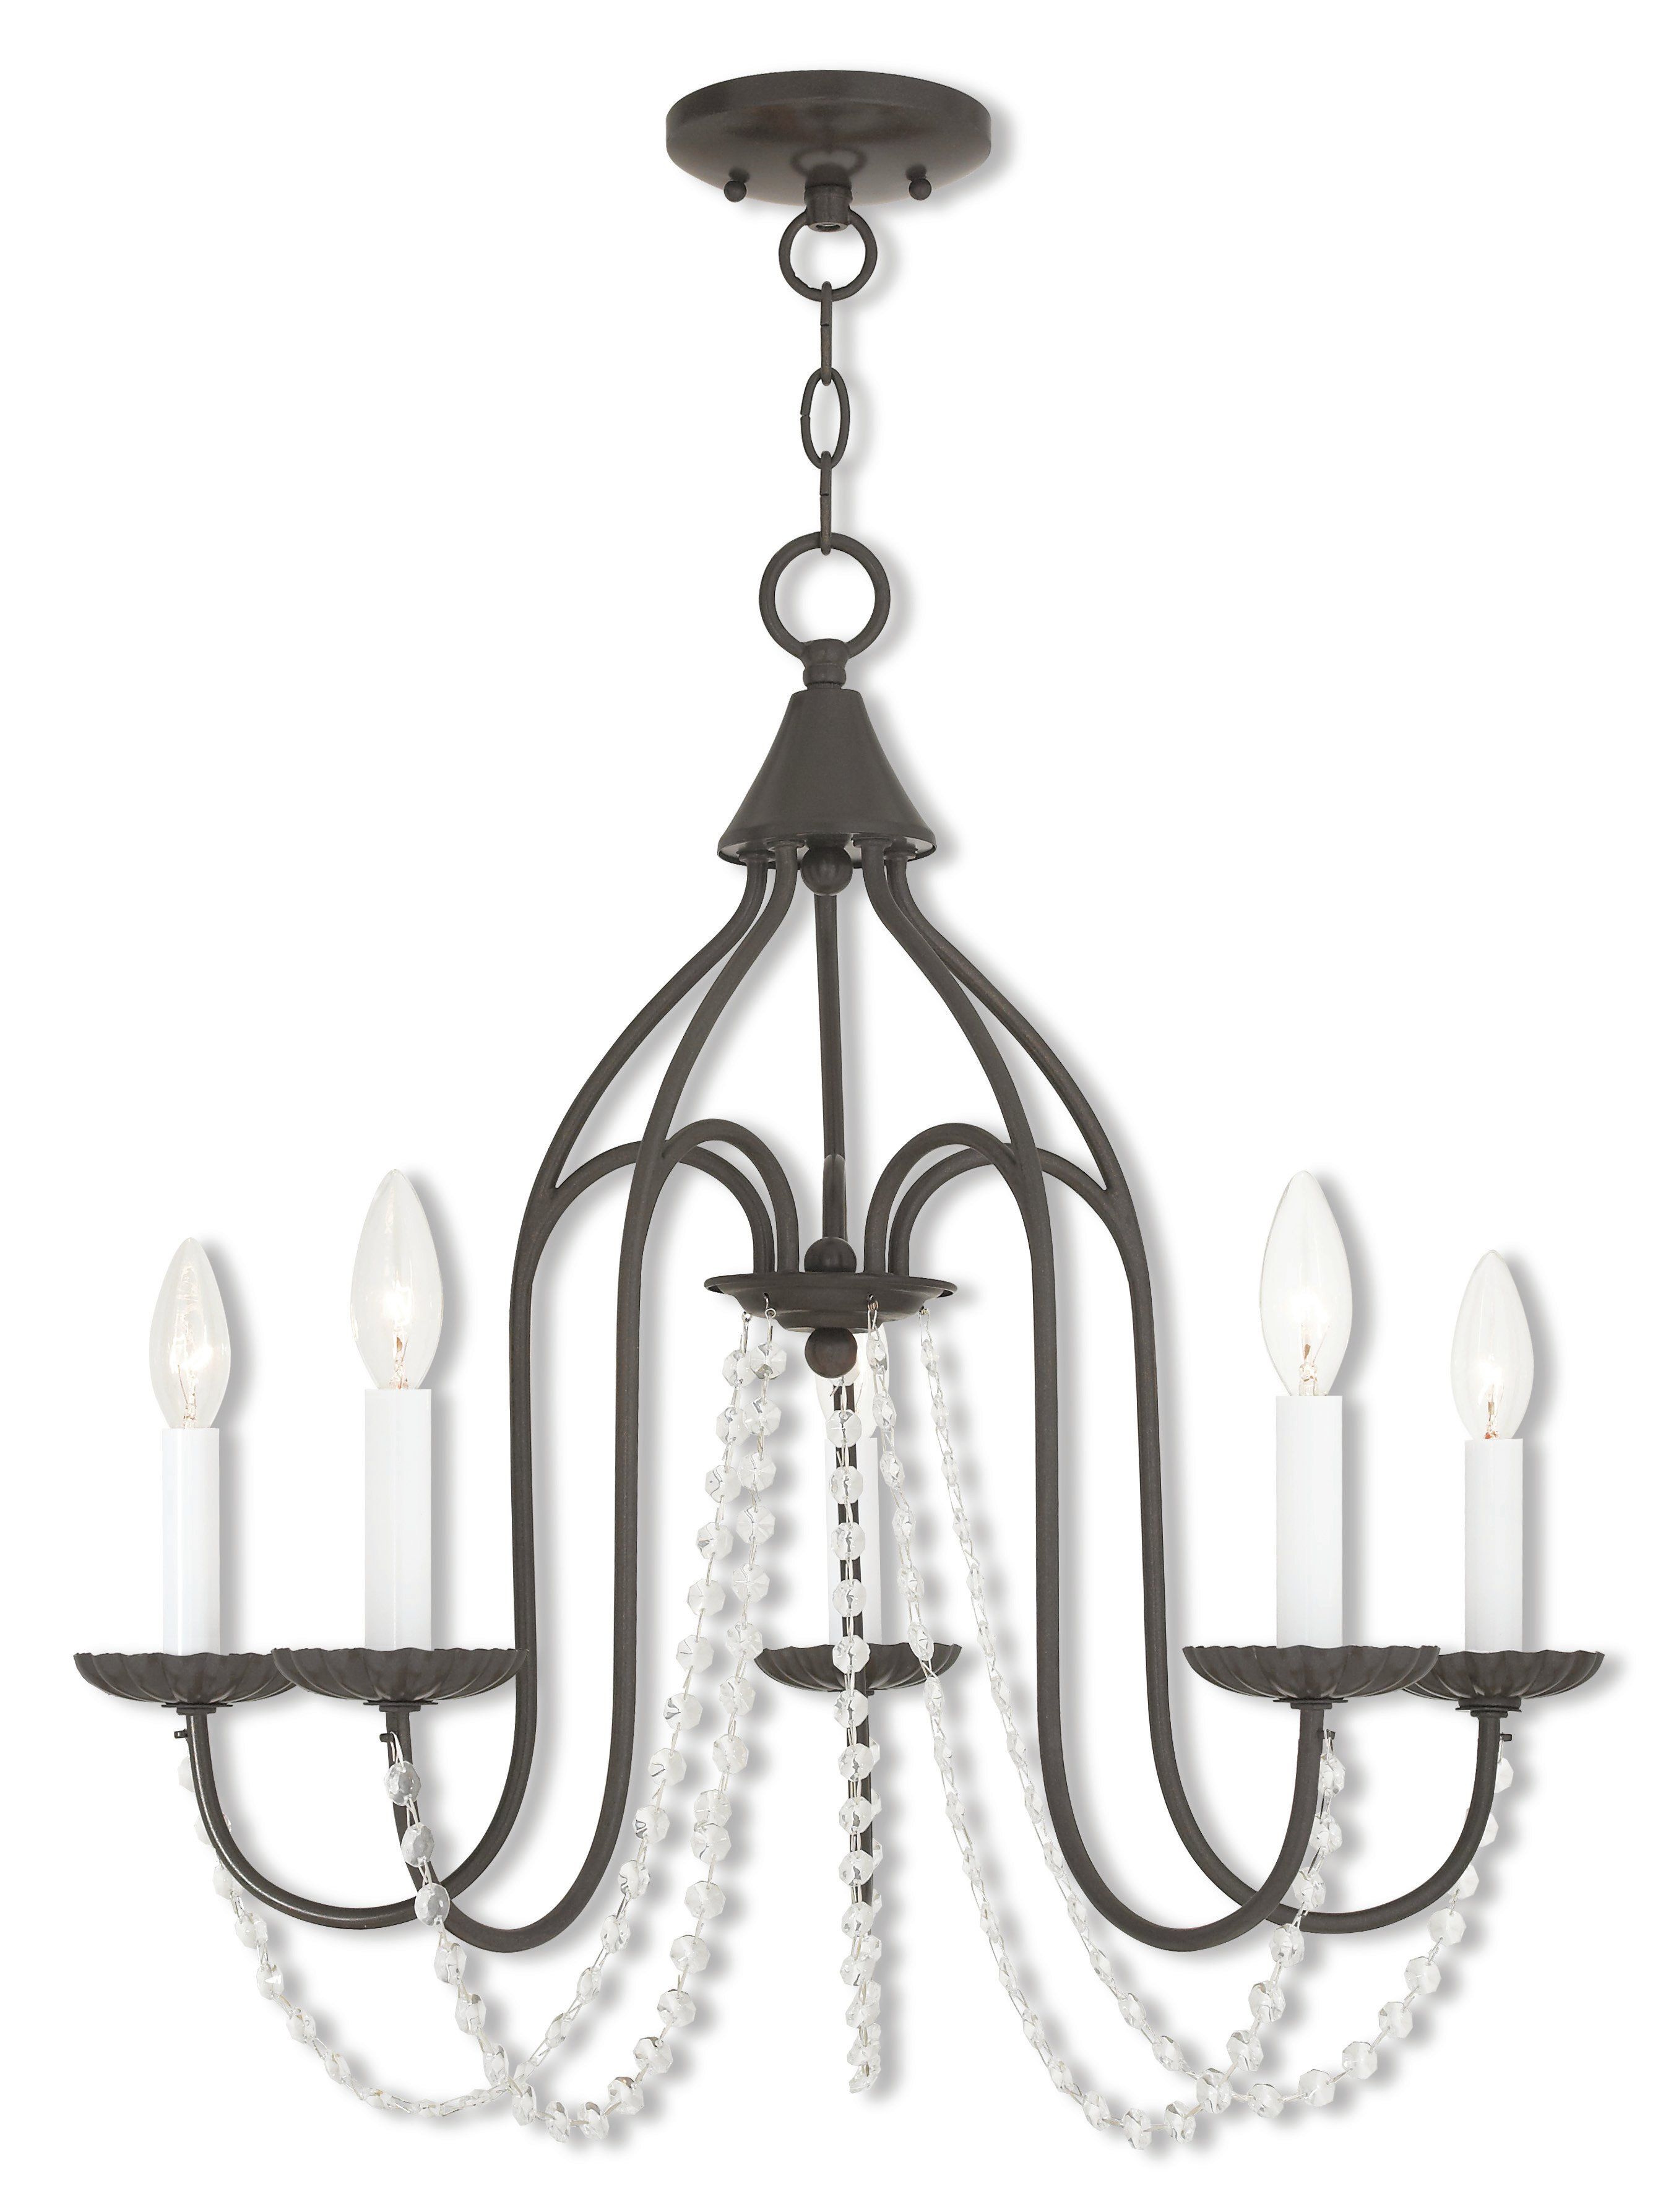 Ophelia & Co. Florentina 5 Light Candle Style Chandelier Throughout Shaylee 5 Light Candle Style Chandeliers (Photo 21 of 30)